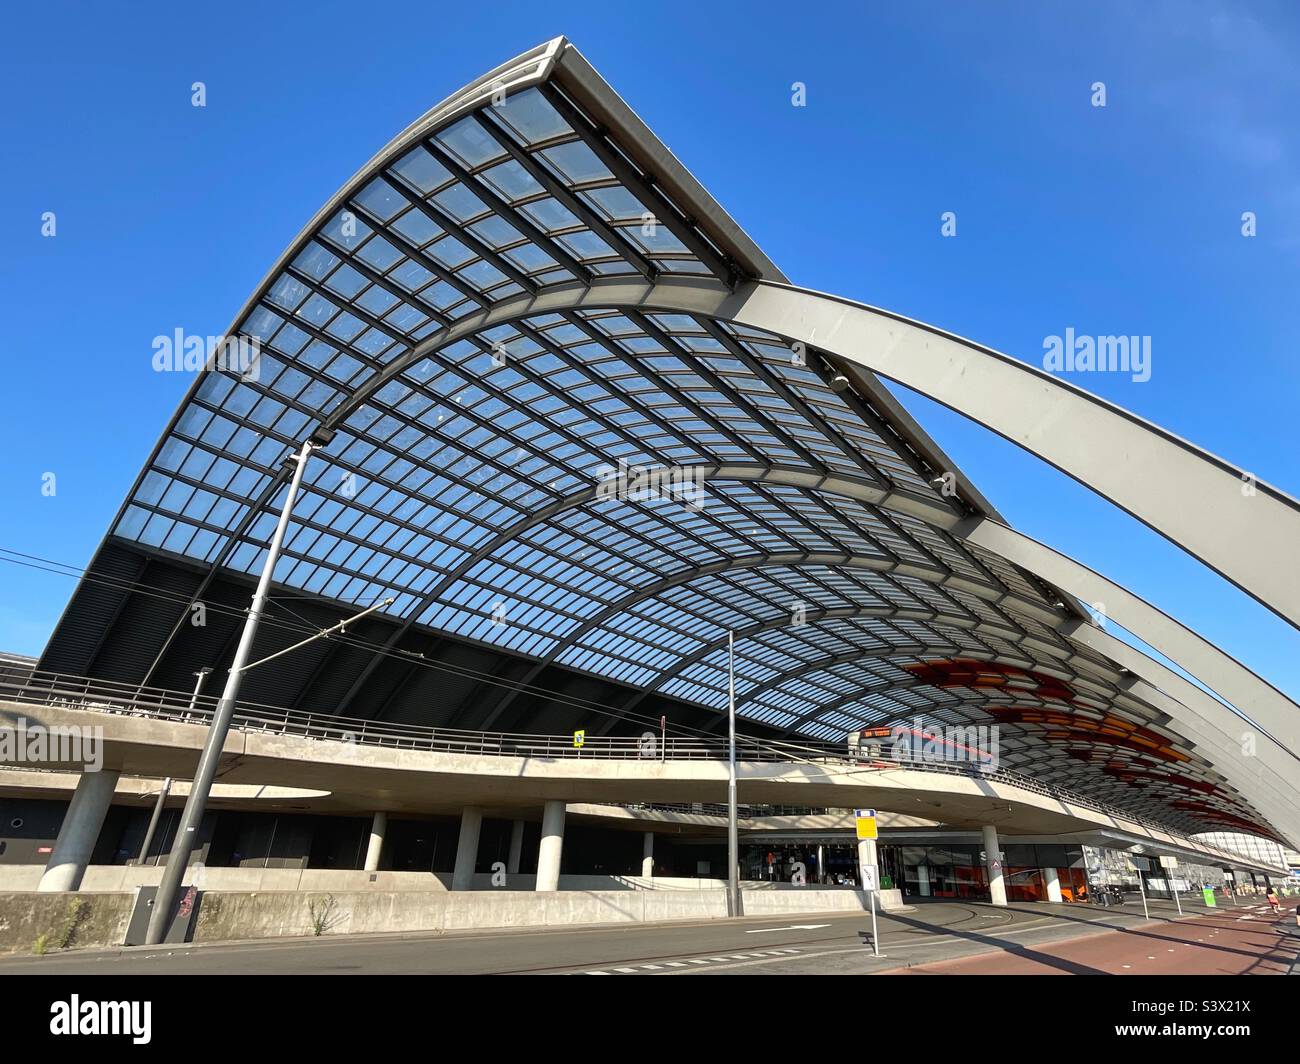 Curved roof of the bus station at Amsterdam’s Centraale railway station Stock Photo